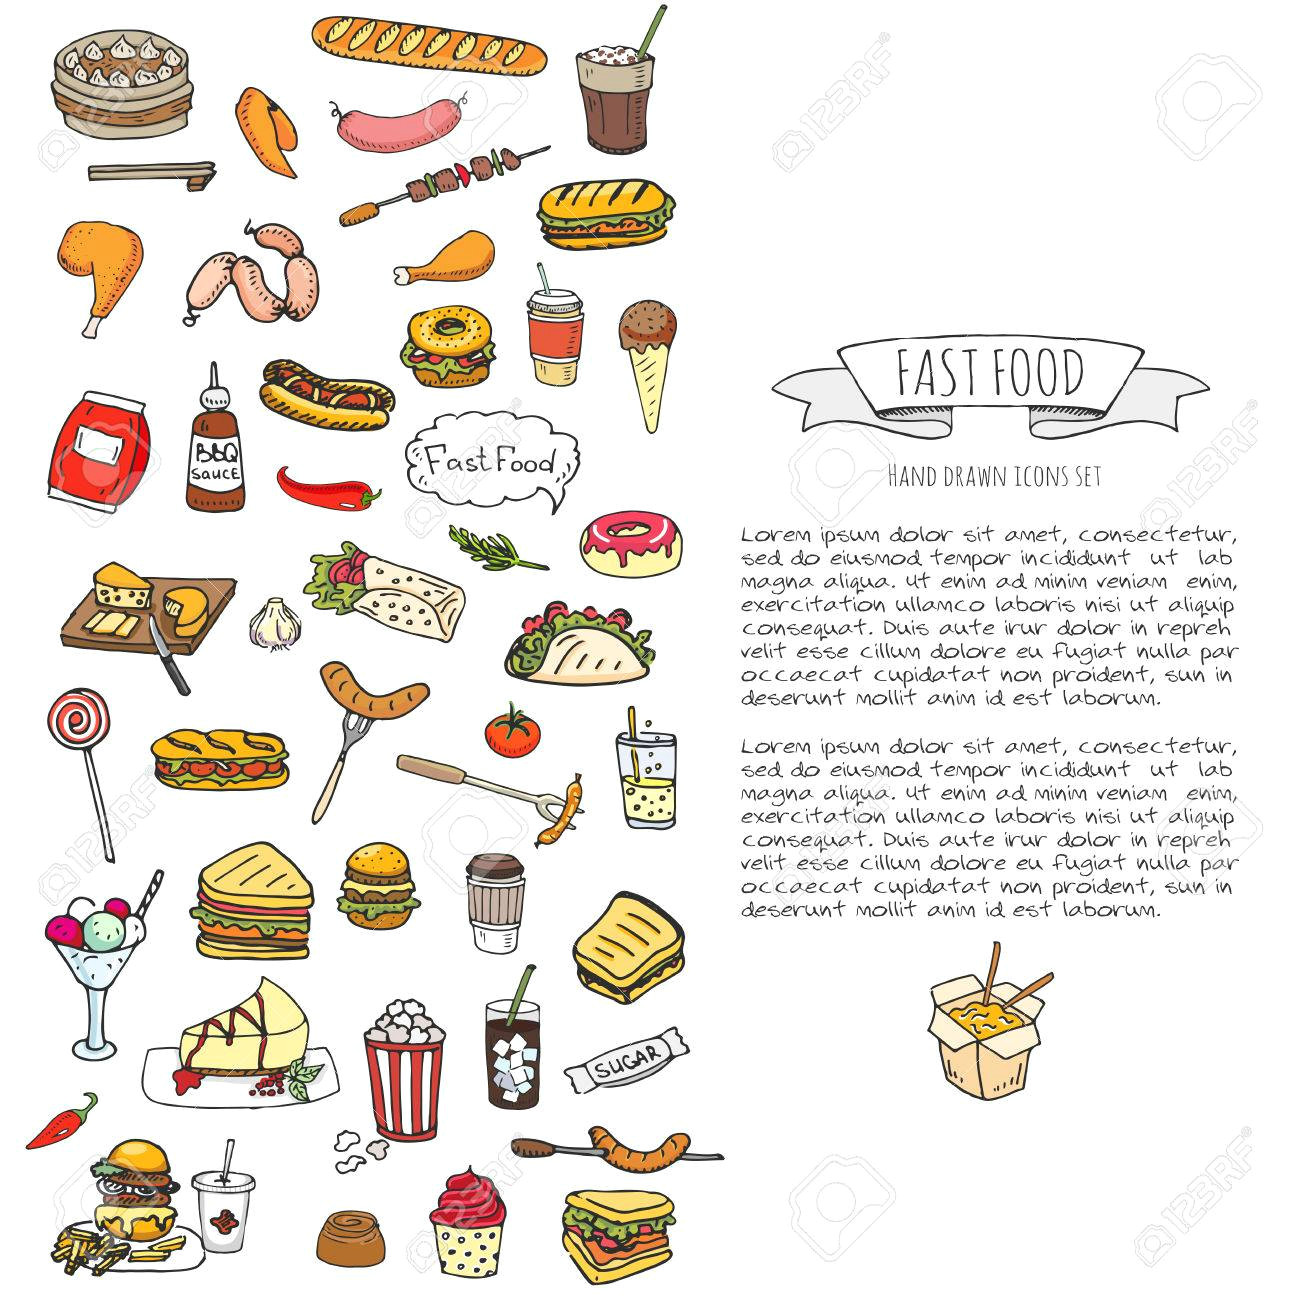 Cartoon Drawing Of A Hot Dog Hand Drawn Doodle Fast Food Icons Set Vector Illustration Junk